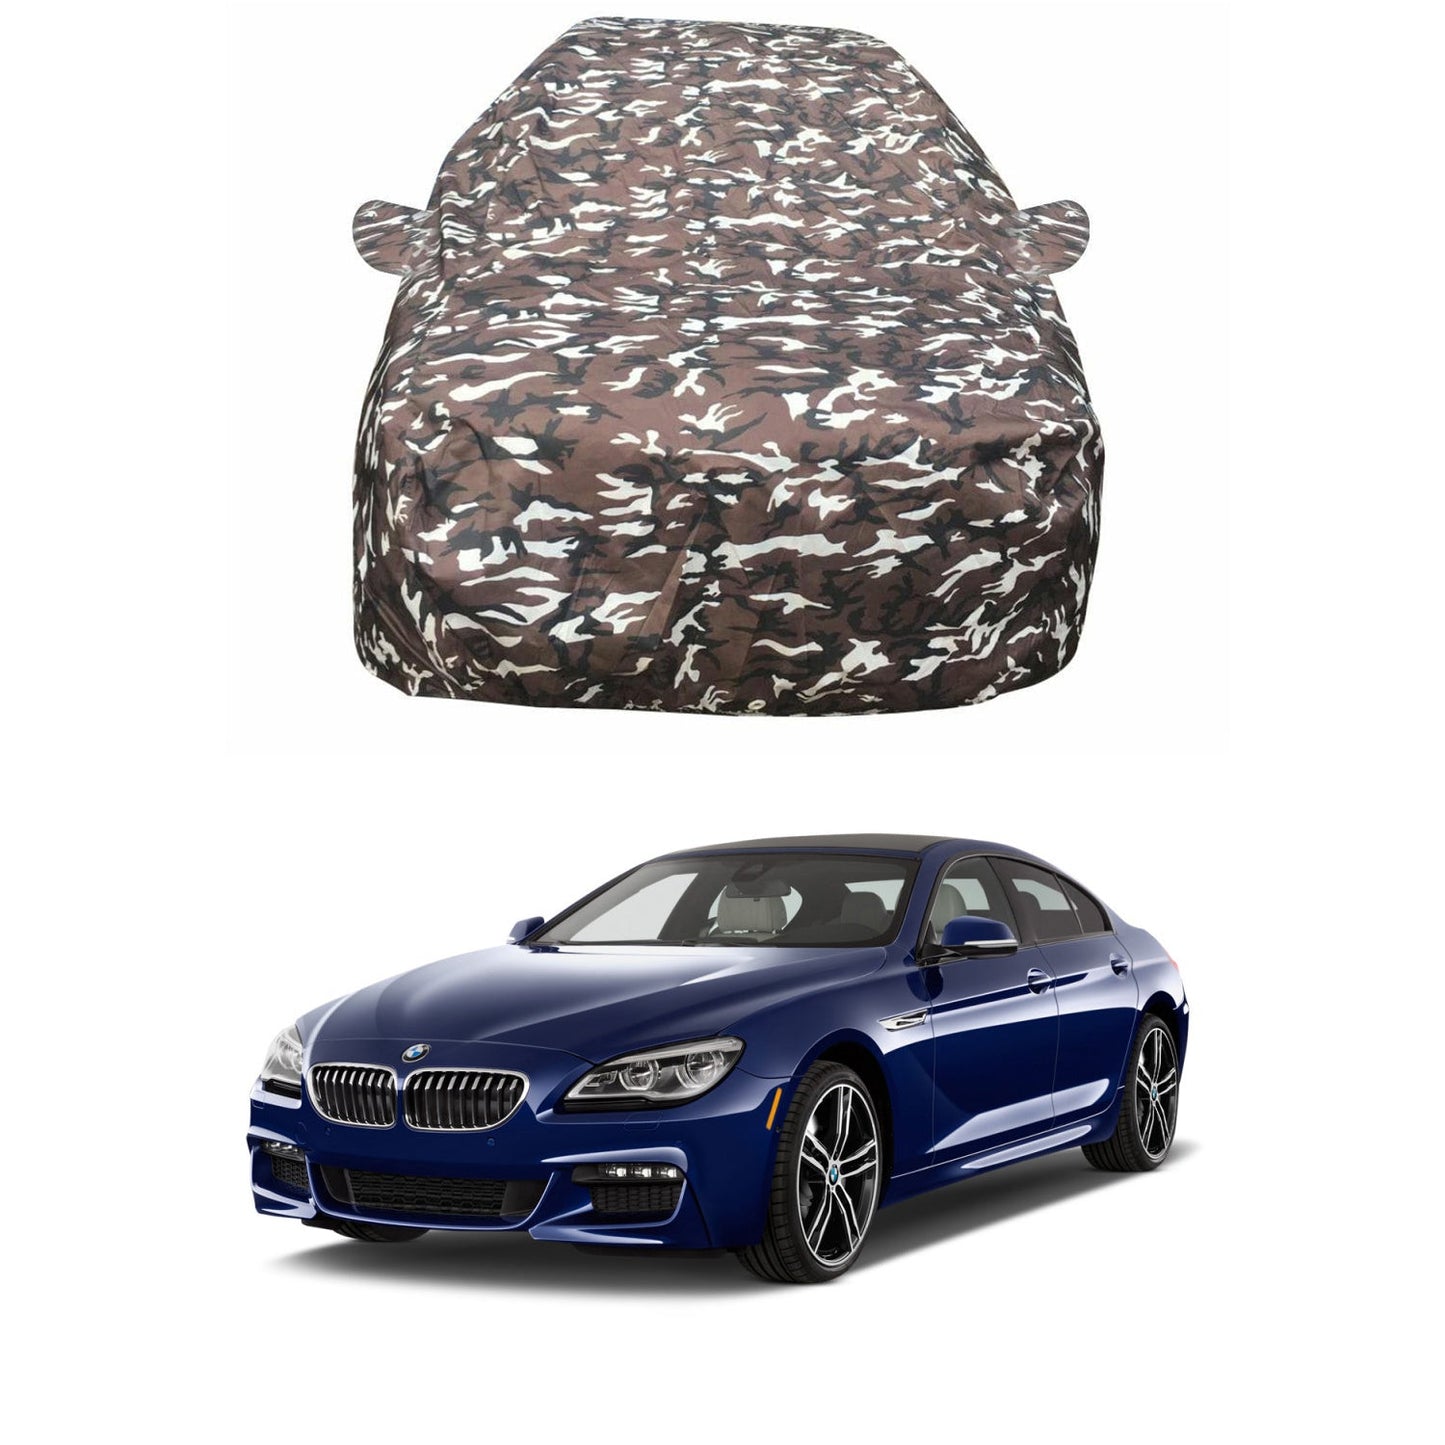 Oshotto Ranger Design Made of 100% Waterproof Fabric Car Body Cover with Mirror Pockets For BMW 6 Series